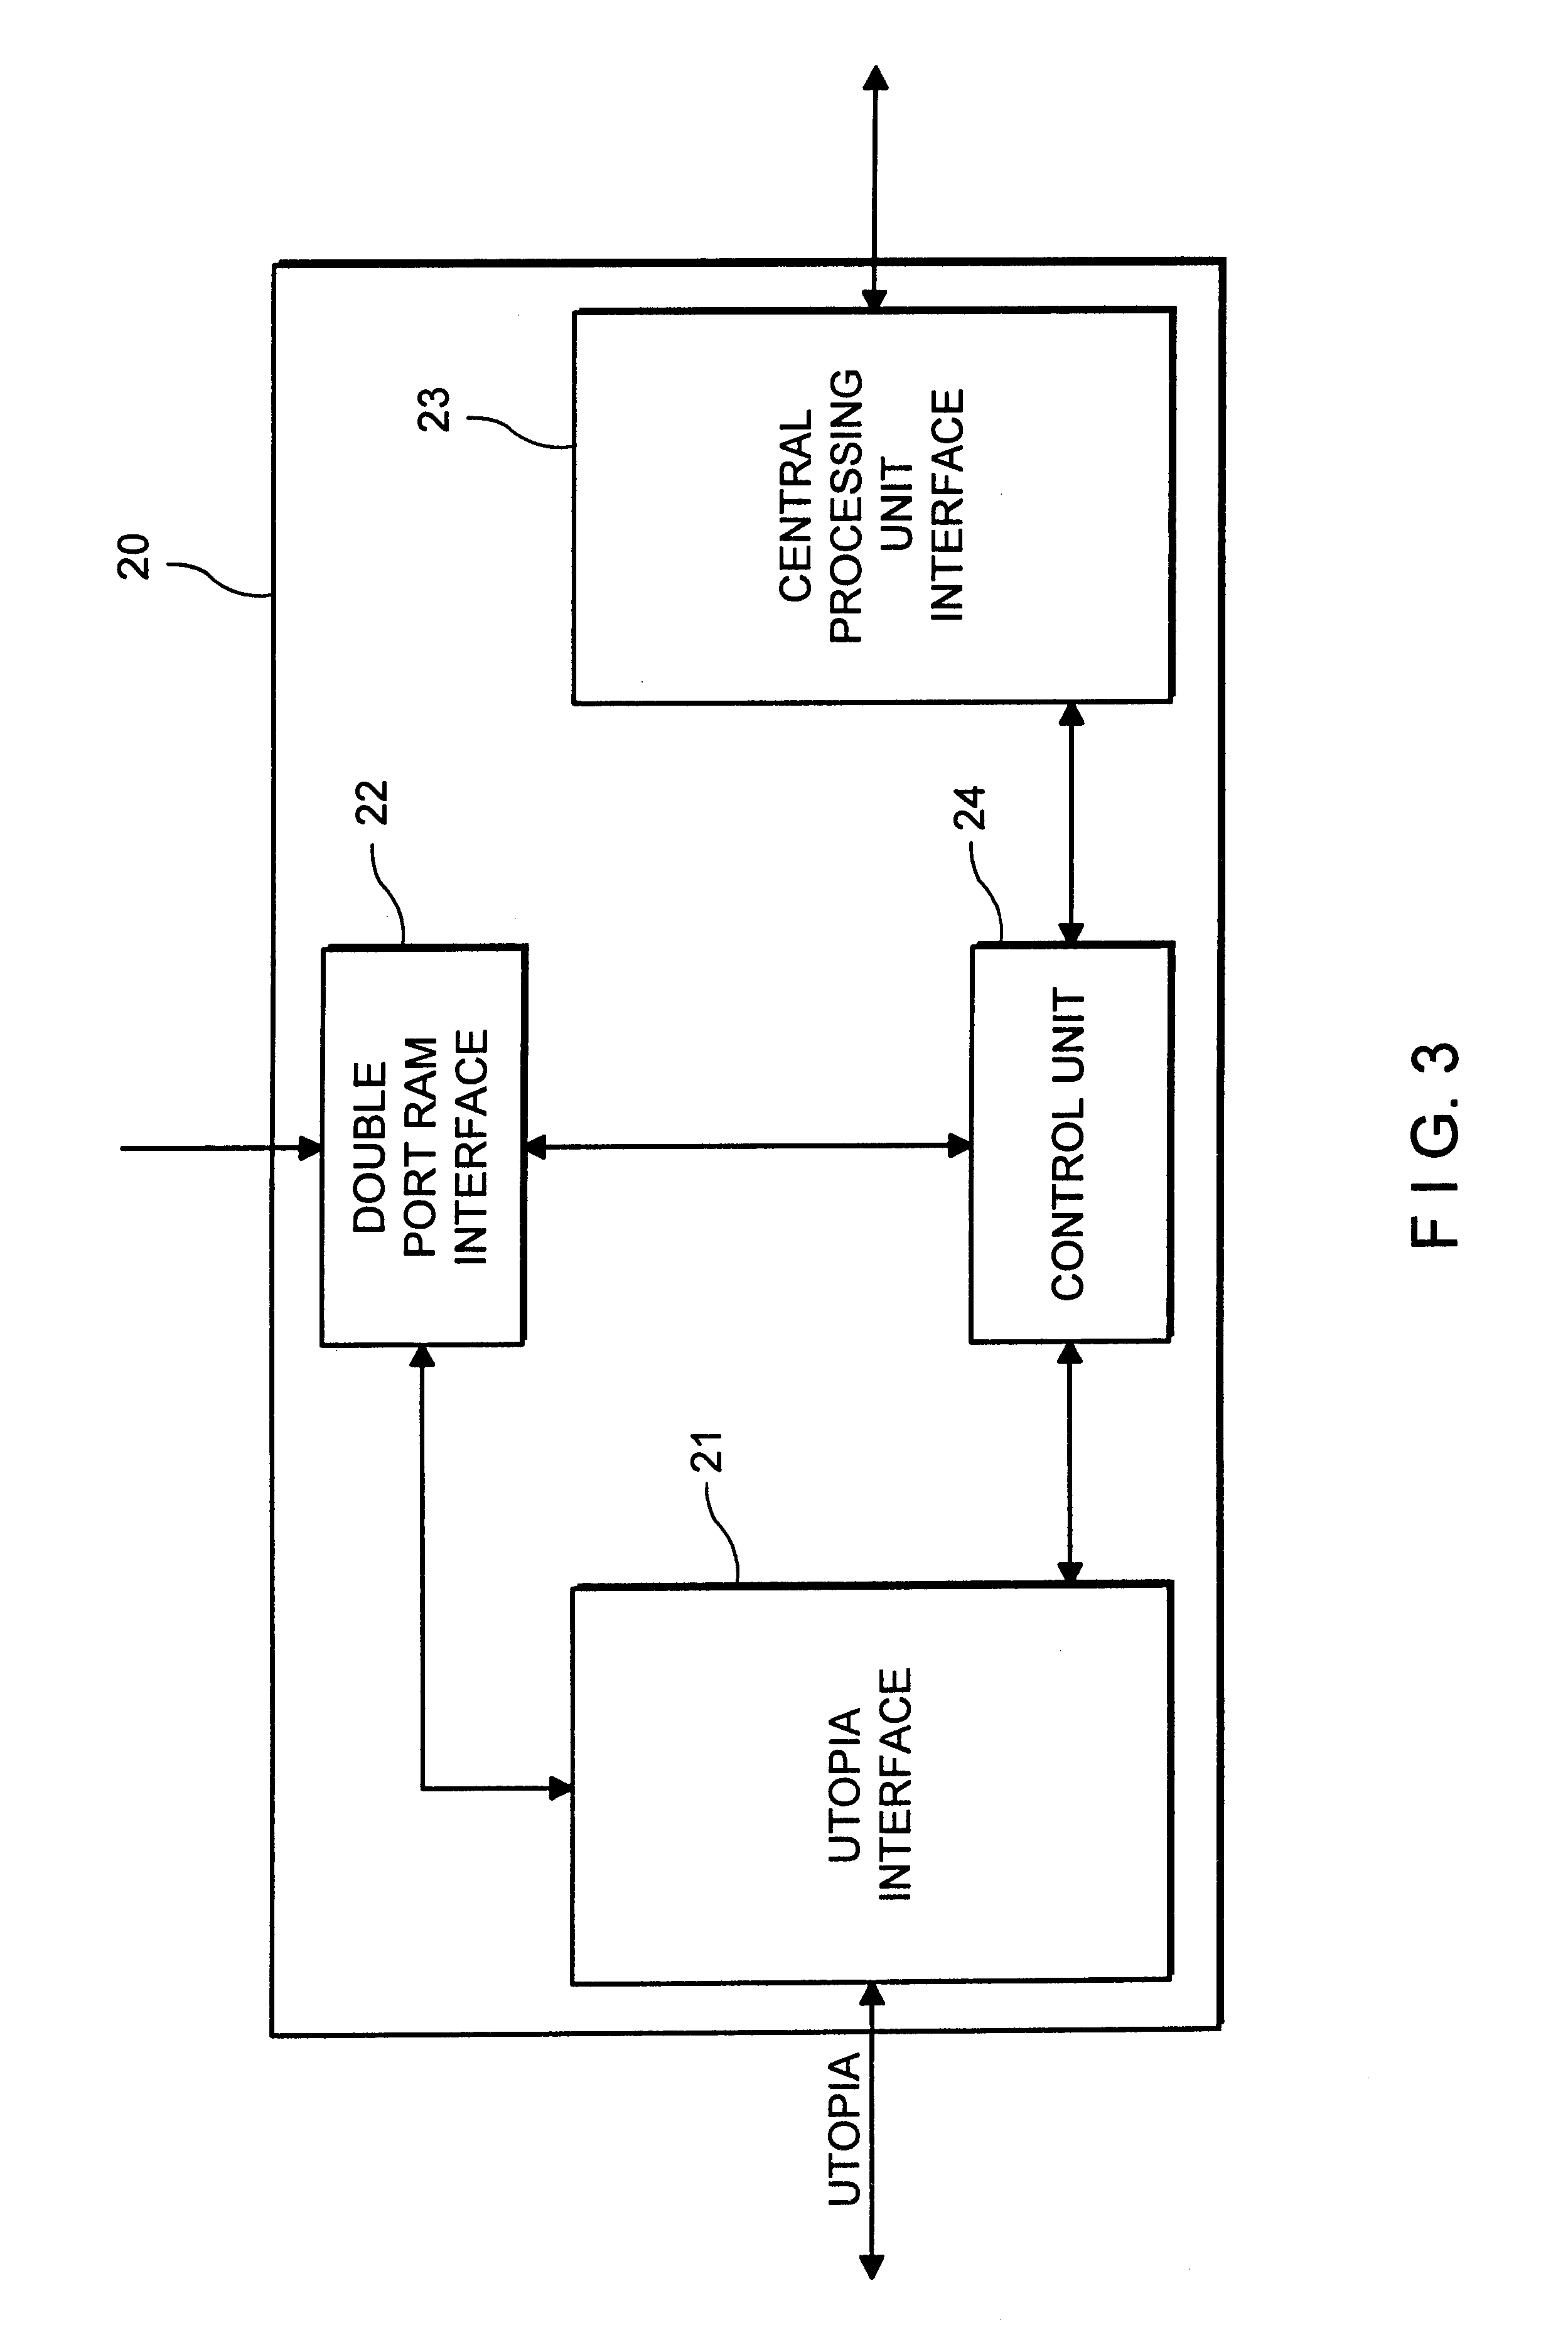 Asynchronous transfer mode adaptation layer (AAL) processing method